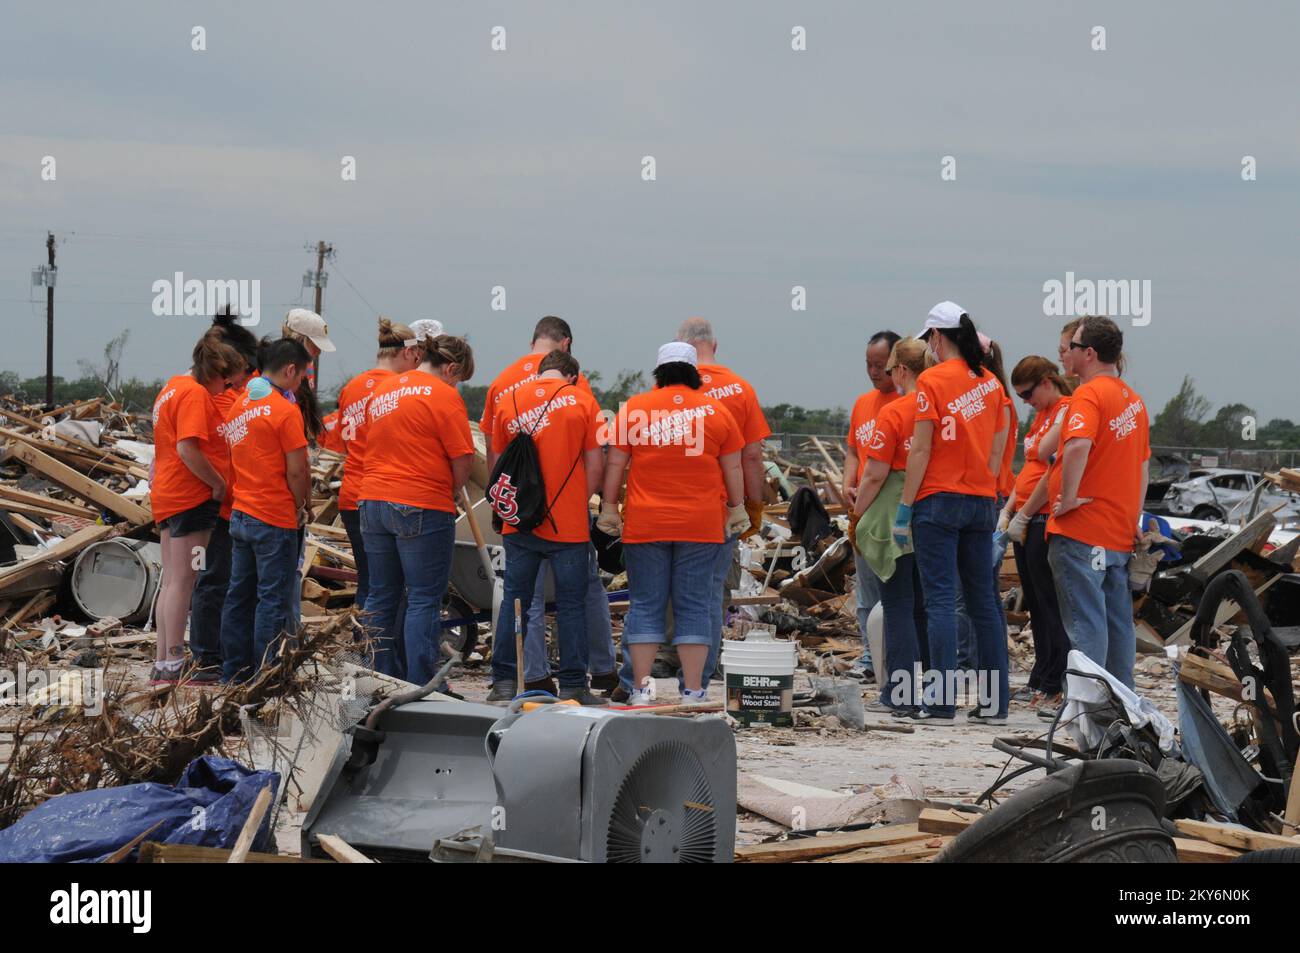 samaritans purse volunteers pause to pray photographs relating to disasters and emergency management programs activities and officials 2KY6N0K